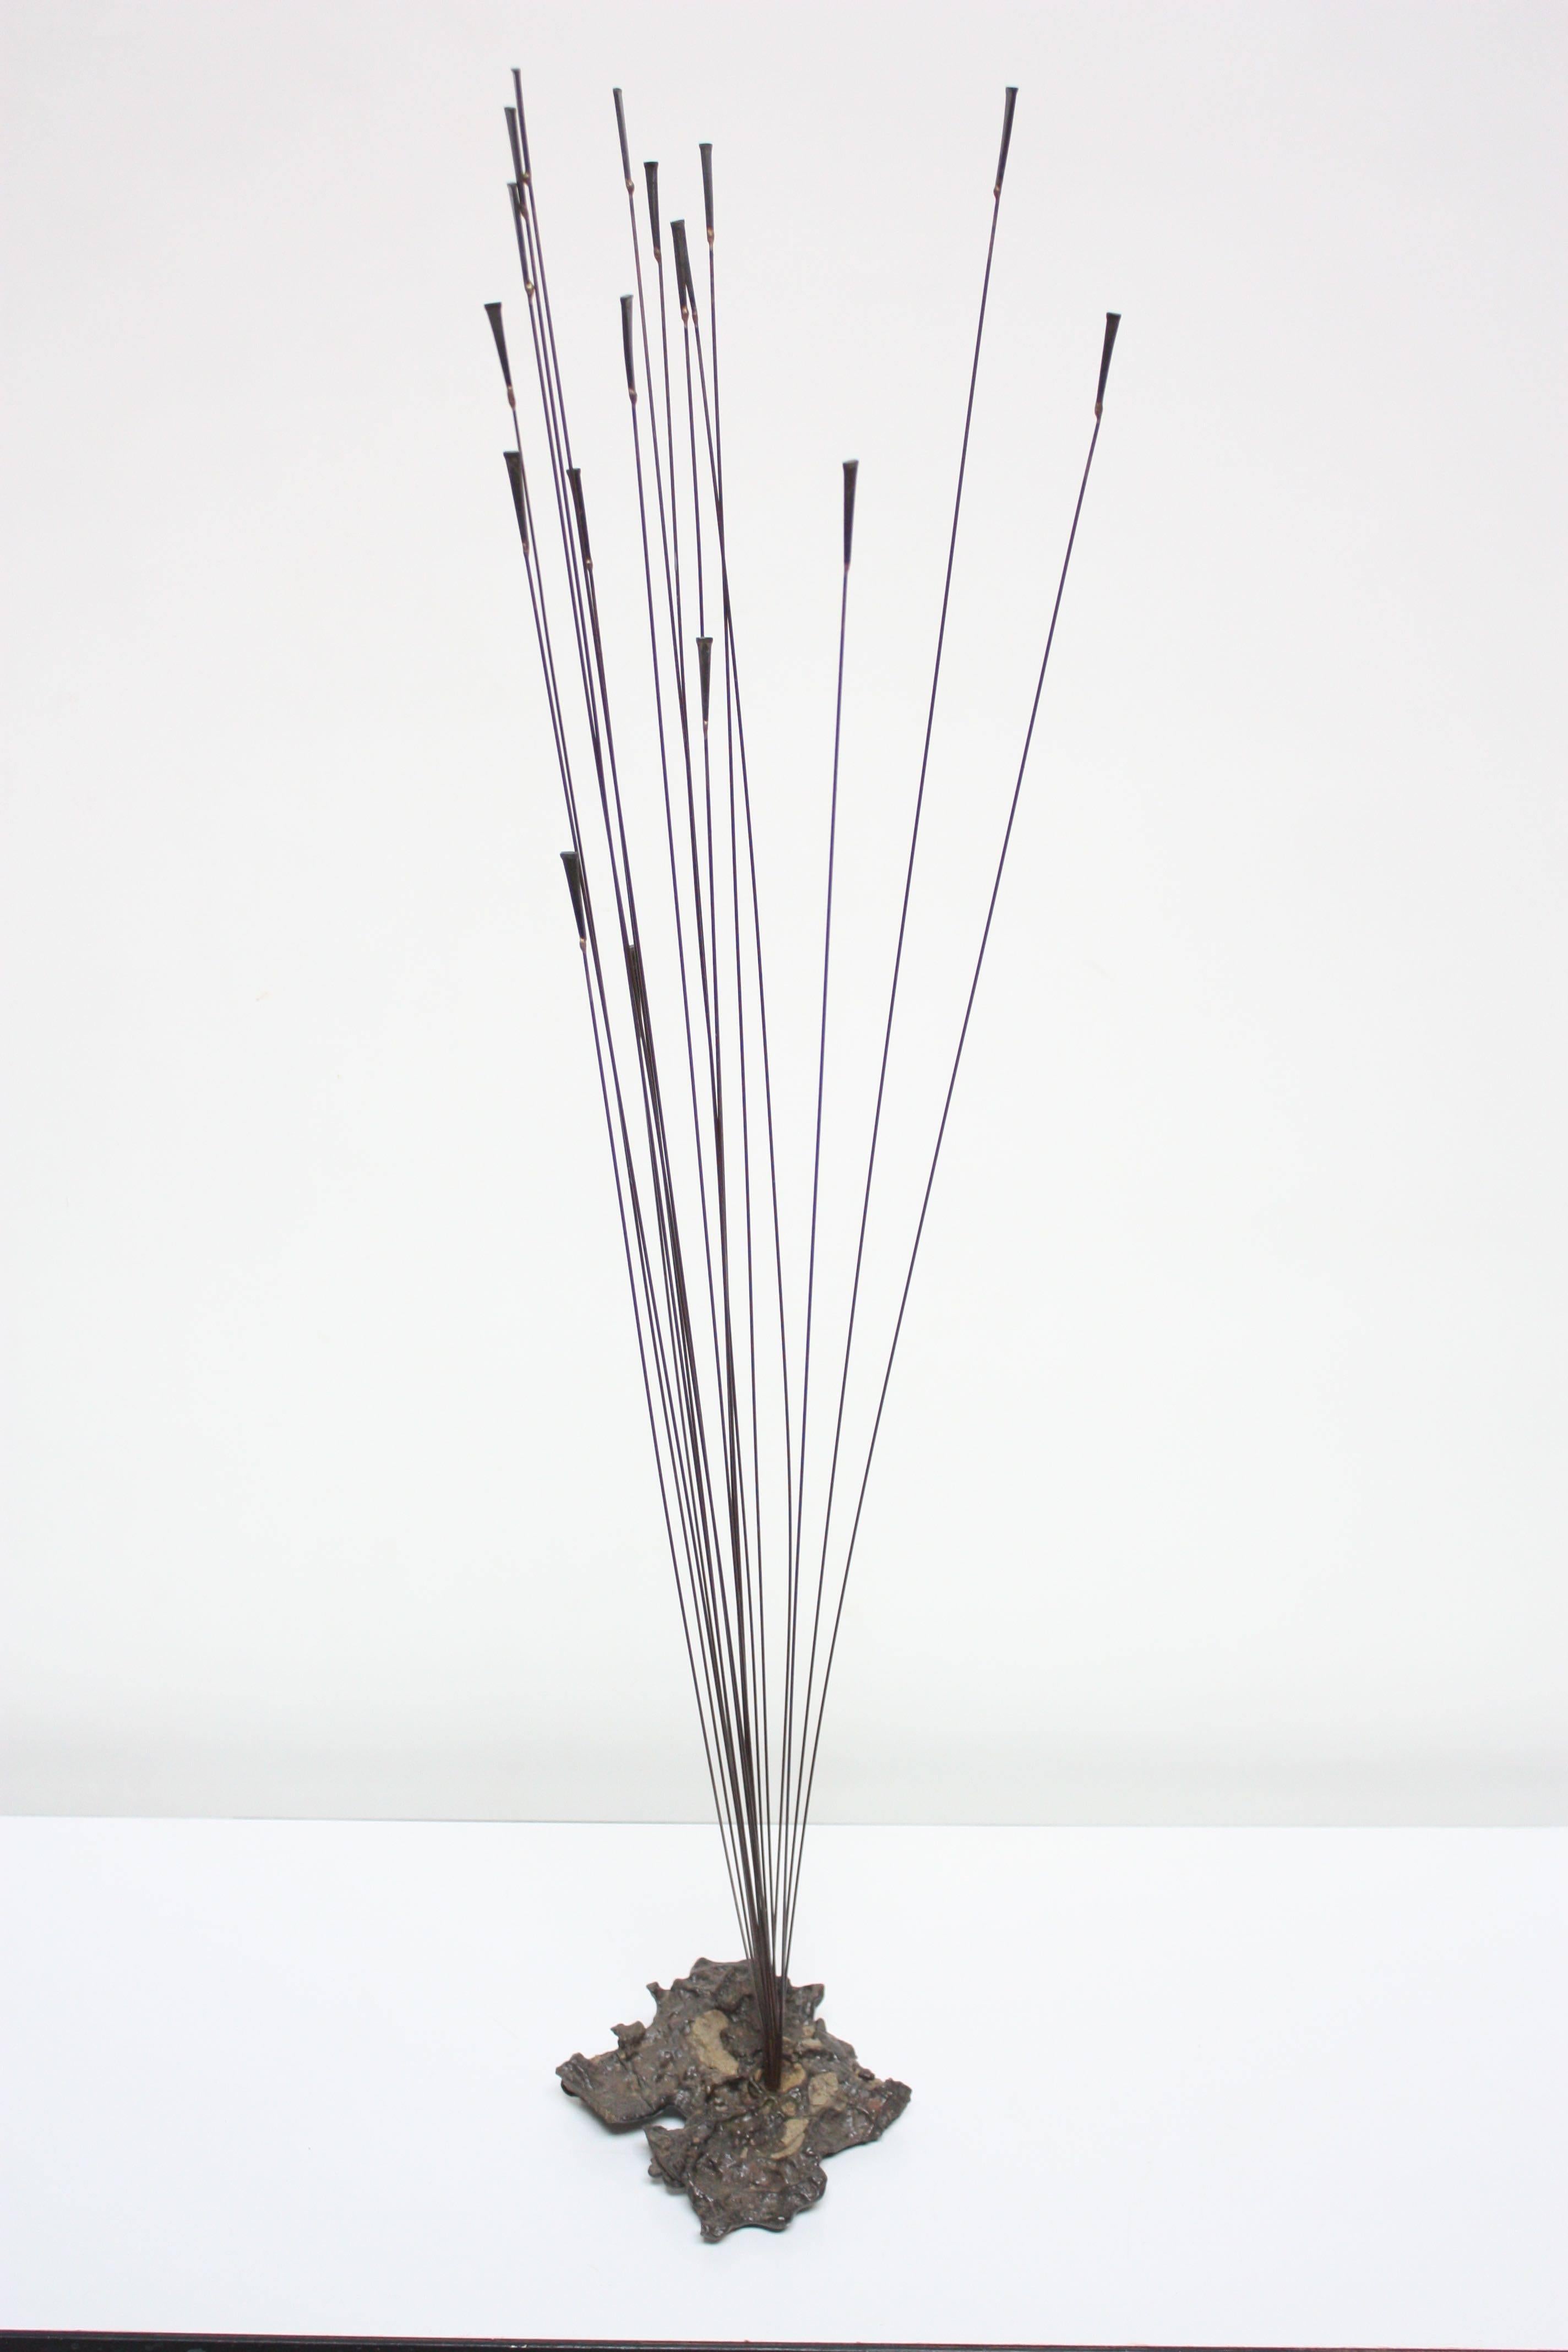 1960s Bowie Brutalist work composed of patinated steel rods and braze welded masonry nails with gilt decoration which fan out to create a free-form / moving sculpture. The cluster of rods is housed in a cast-stone base. 
Base measures: 7.75" L